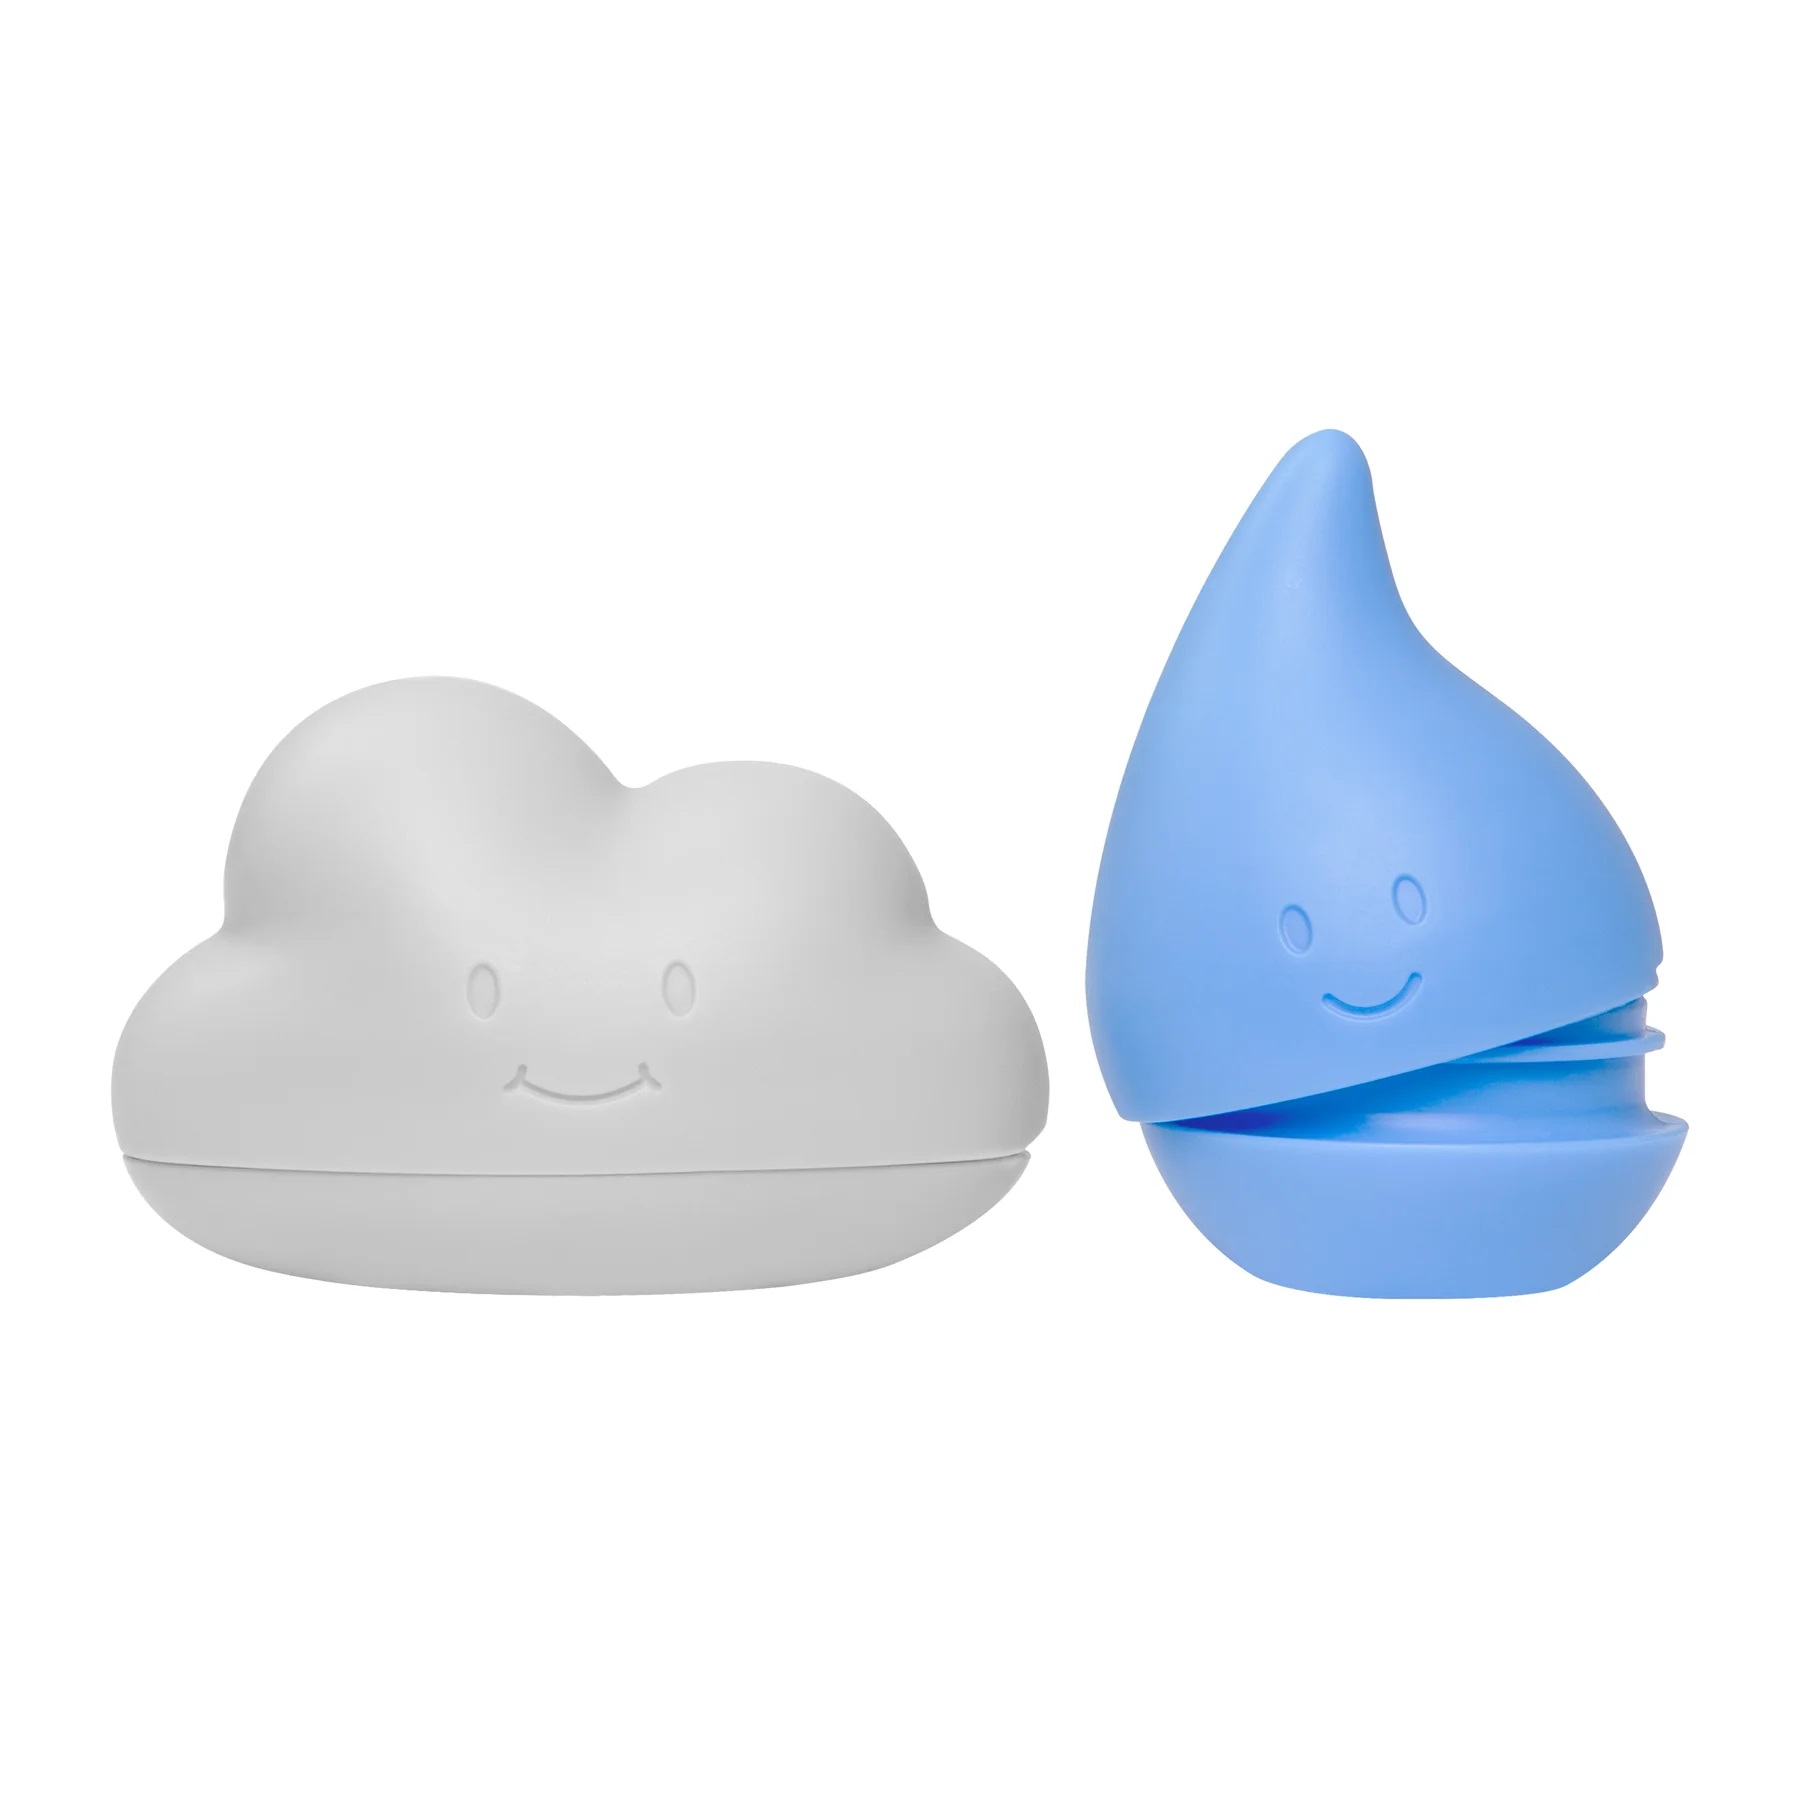 Cloud and Droplet Bath Toys 2